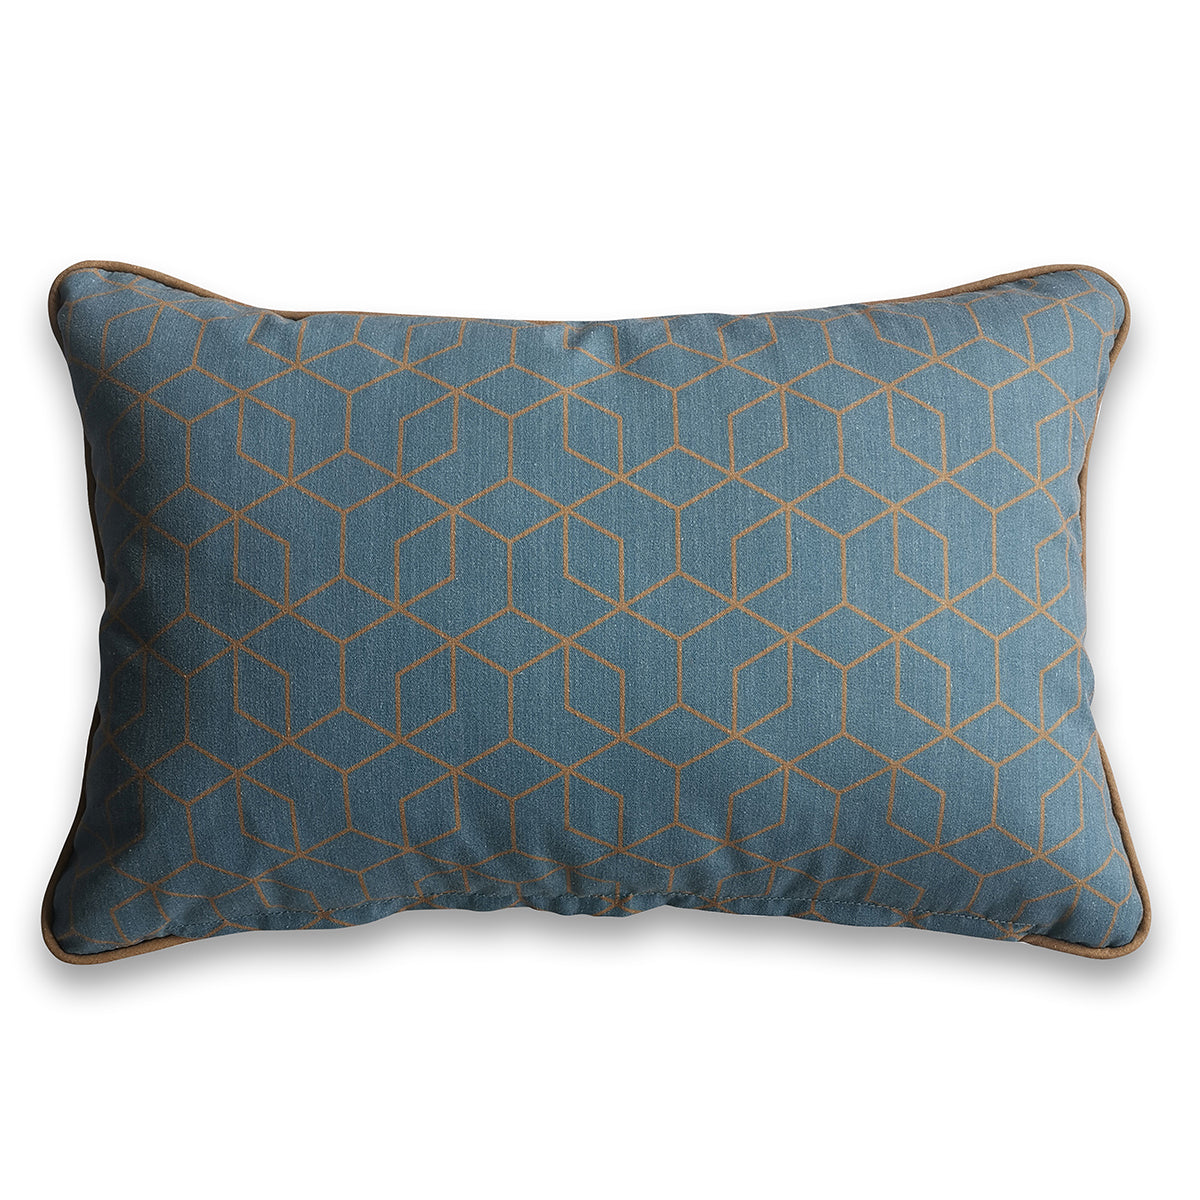 LG | Deluxe Blue & Gold Cube Scatter Cushion - 40cm x 60cm